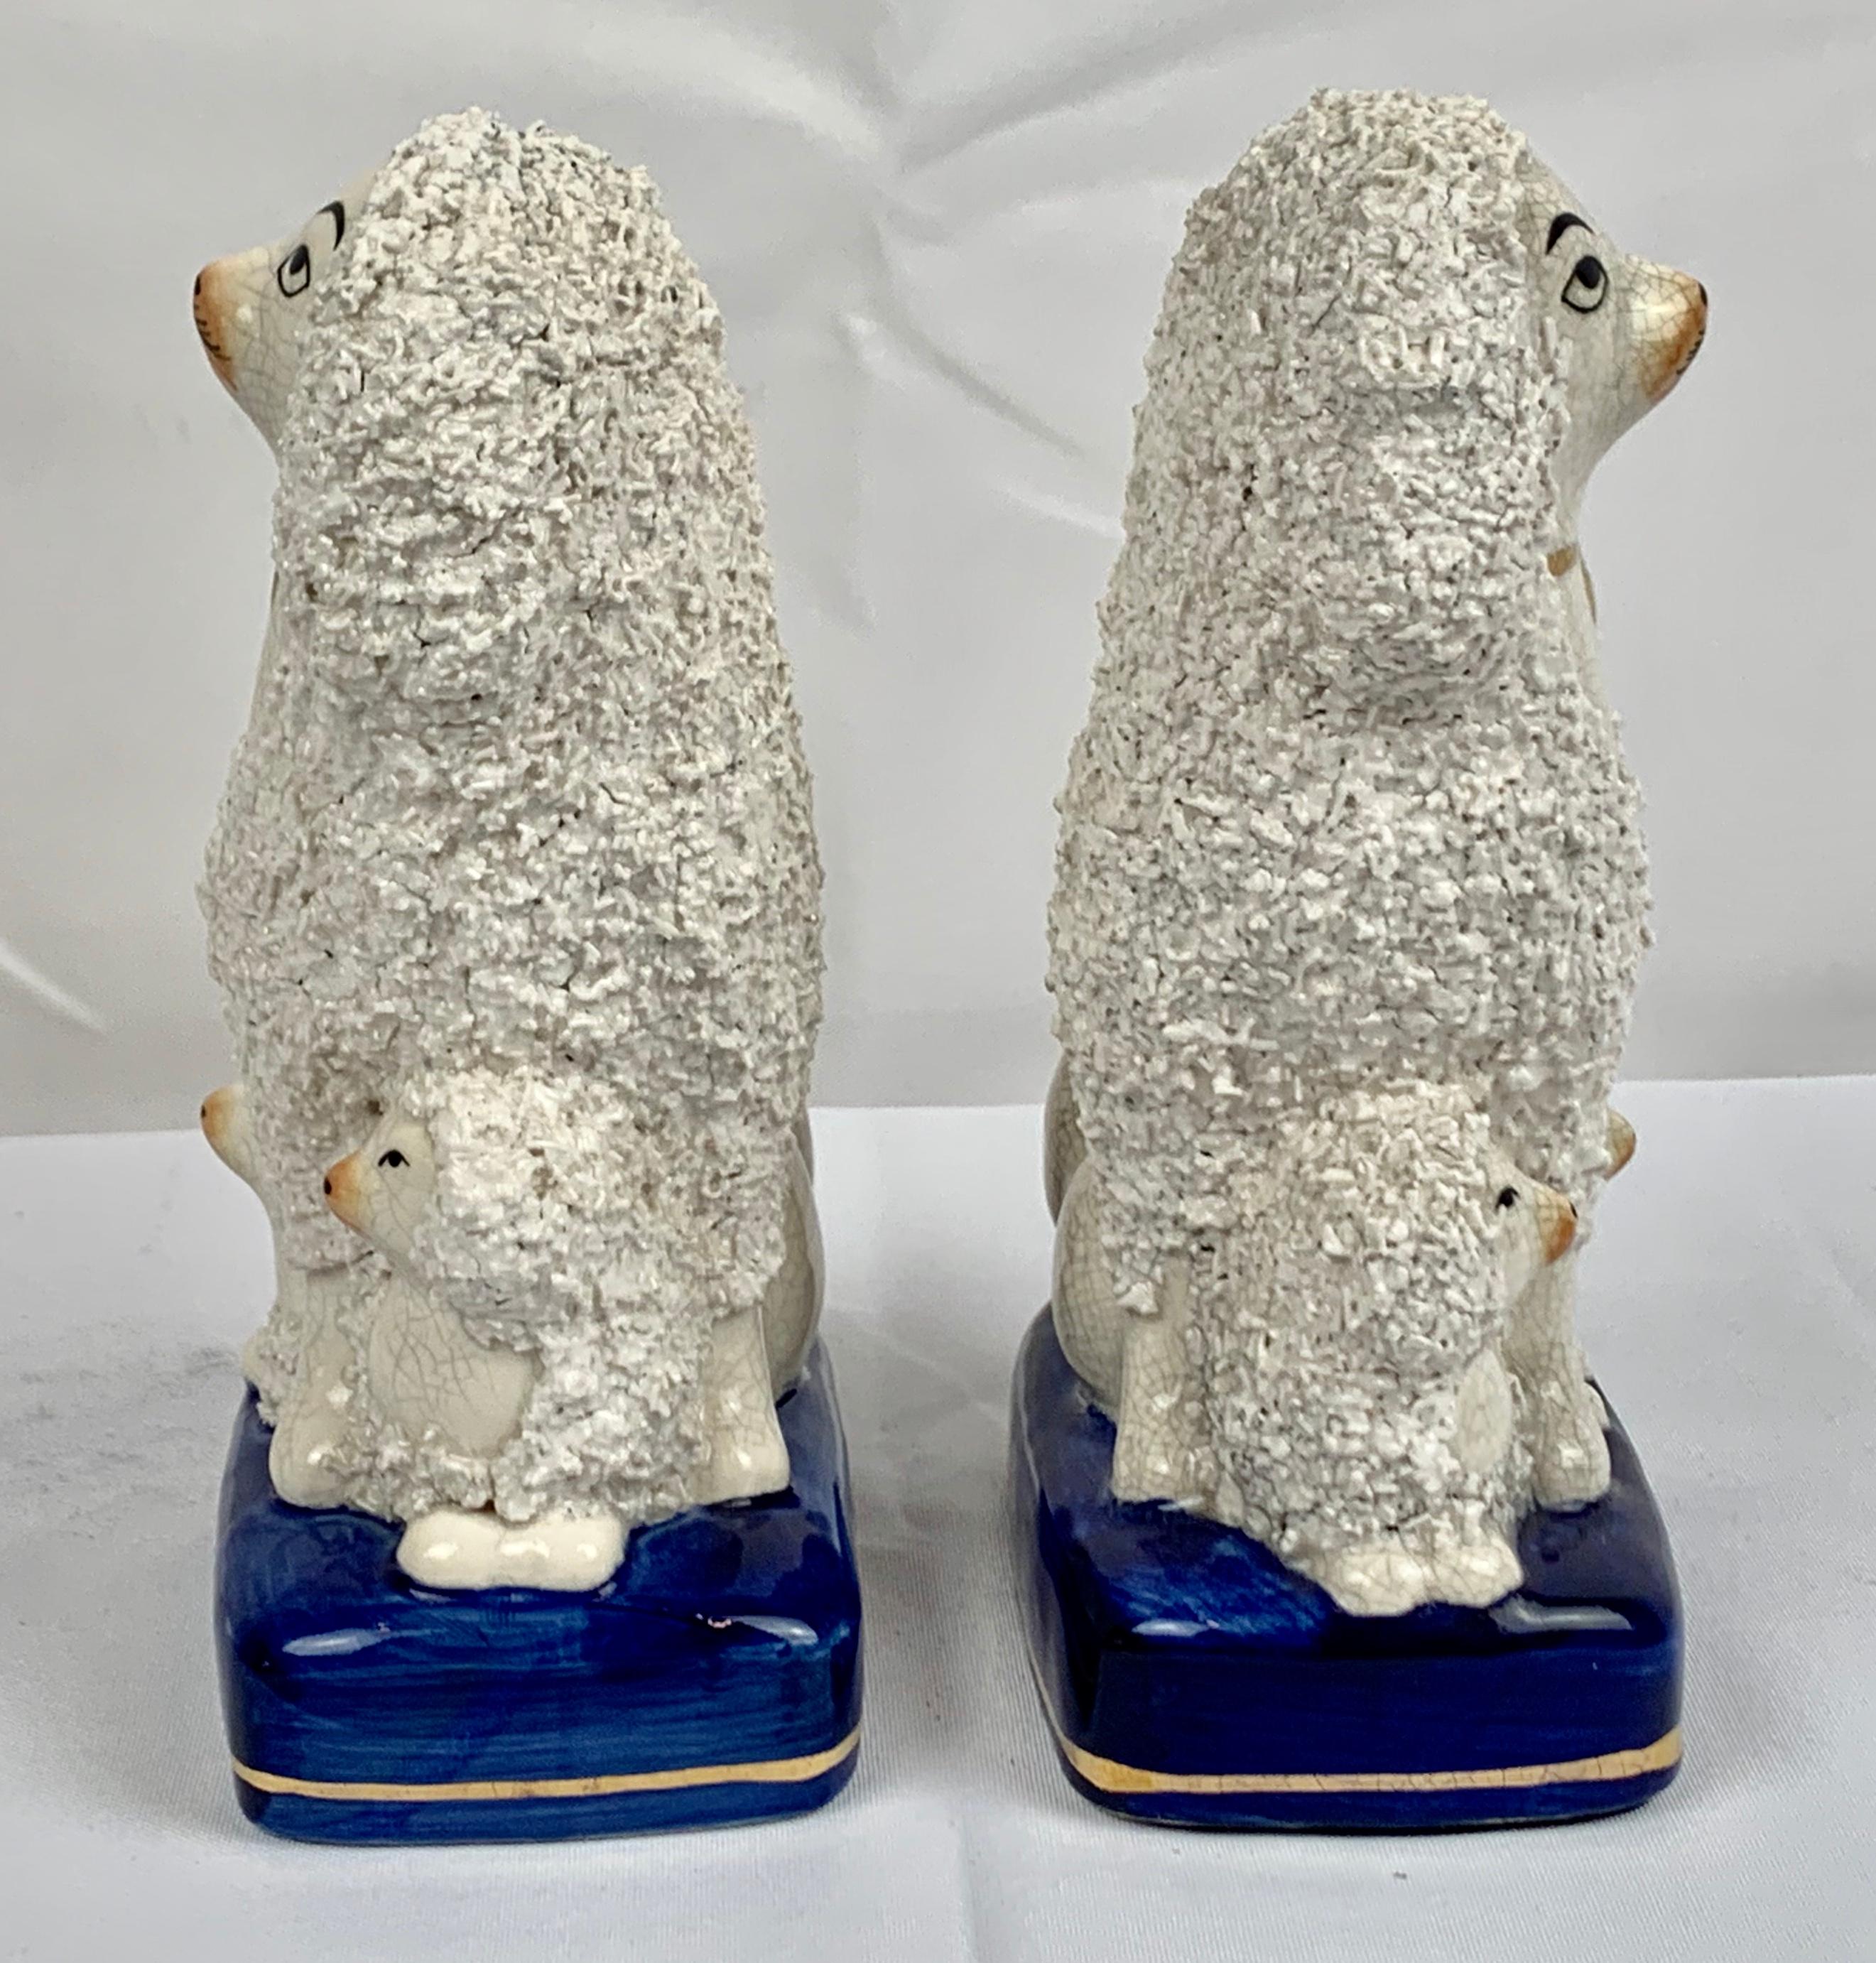 Pair of white Staffordshire poodles with their four pups sitting on cobalt blue bases trimmed with a gold line. Their bodies are covered with bocage, which was to represent fur. The male and female poodles are both wearing the tradirional collar